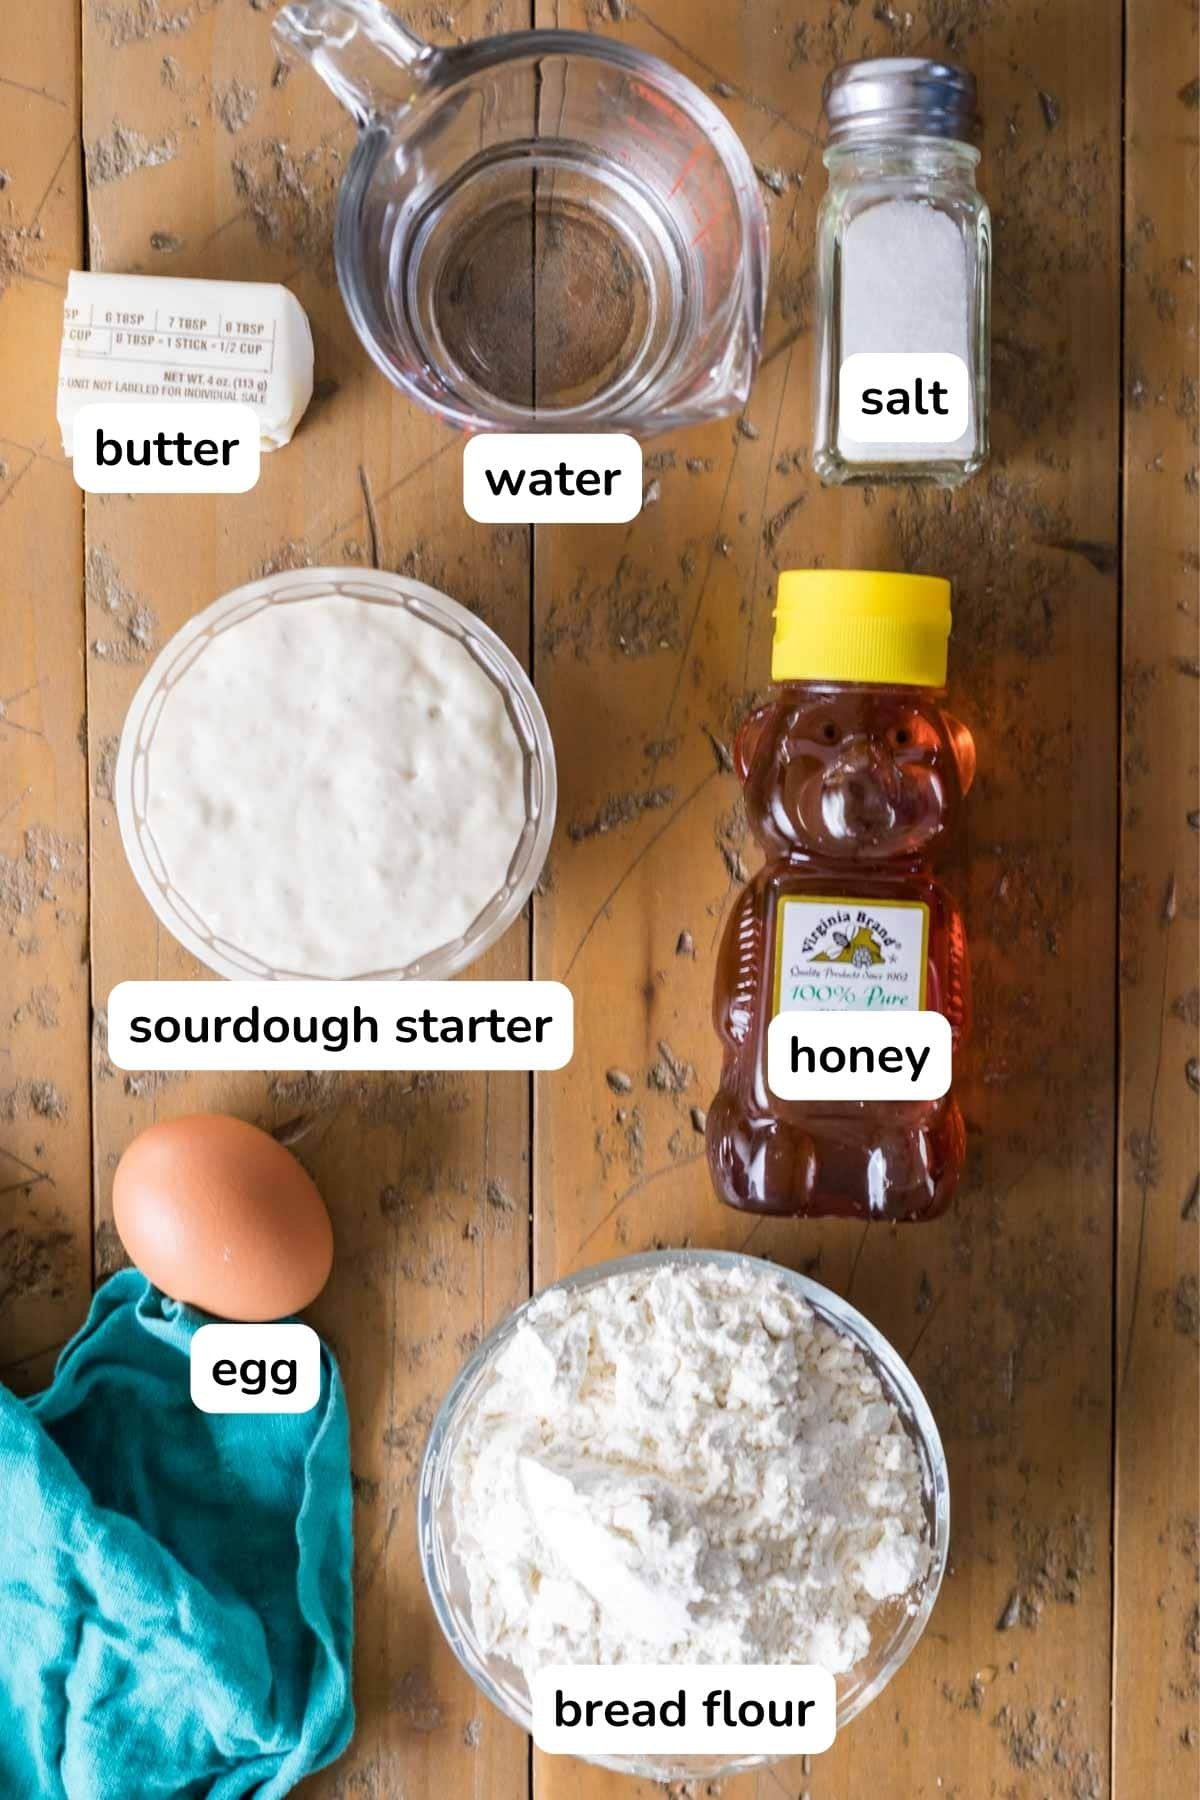 Overhead view of labelled ingredients including sourdough starter, honey, warm water, and more.